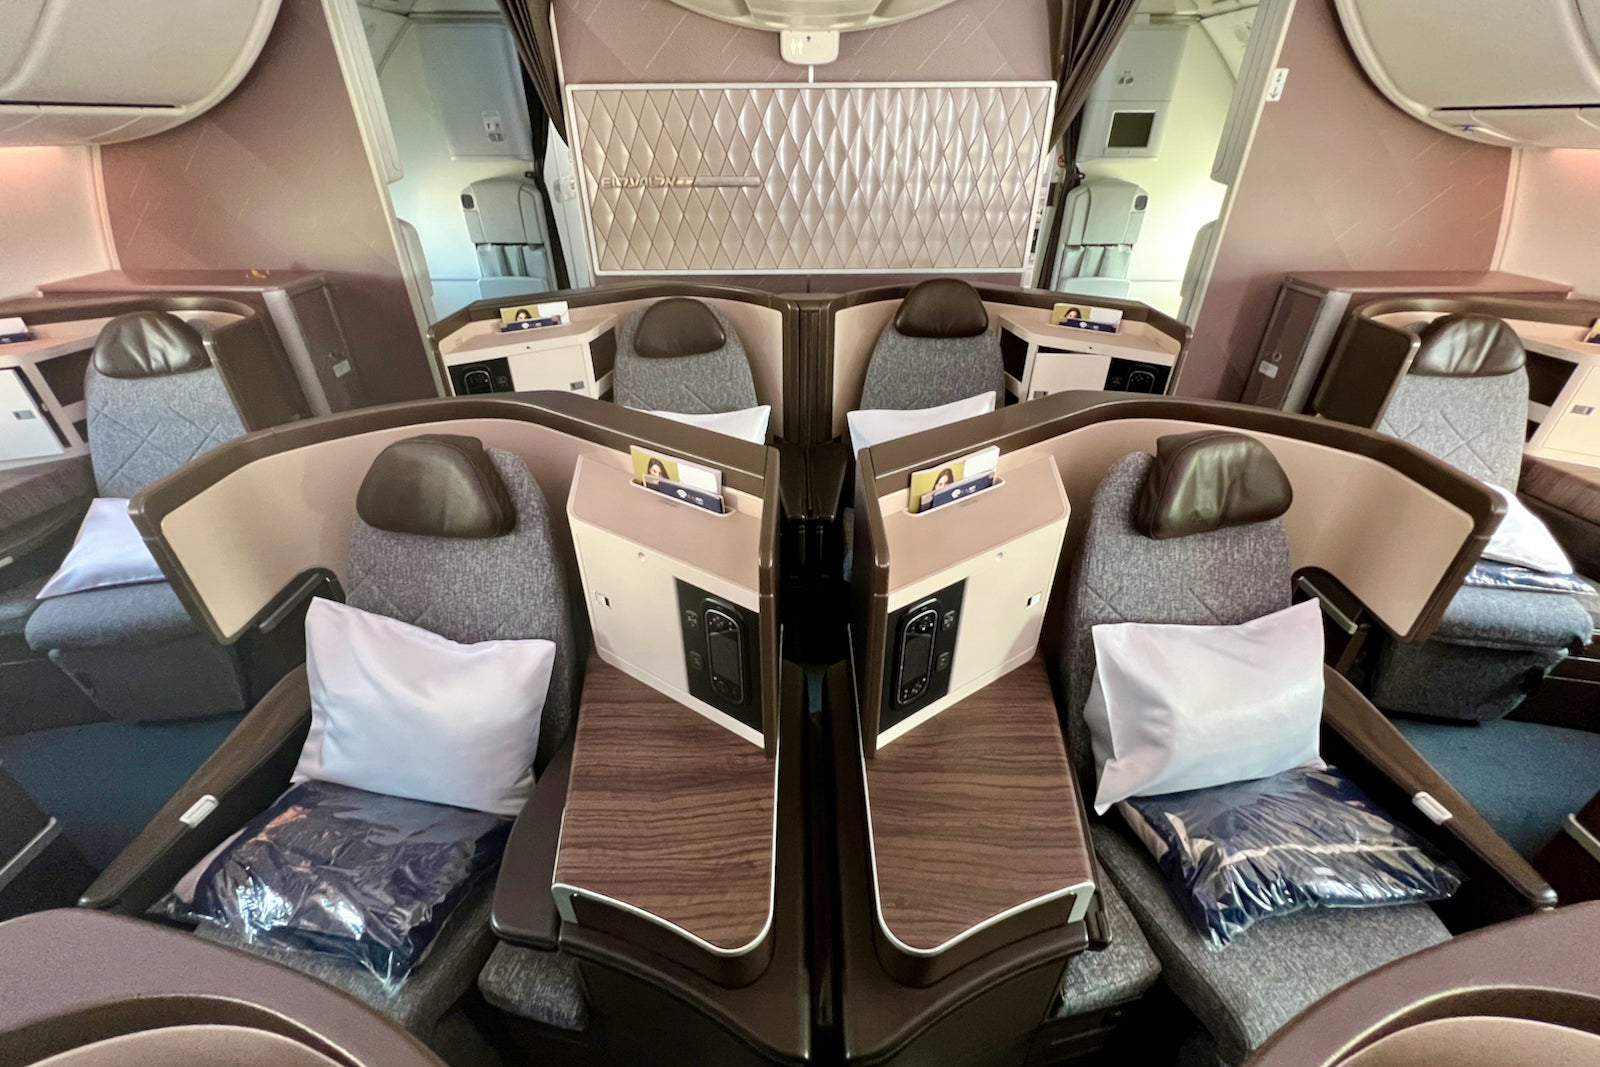 business class seats before the passengers board a plane